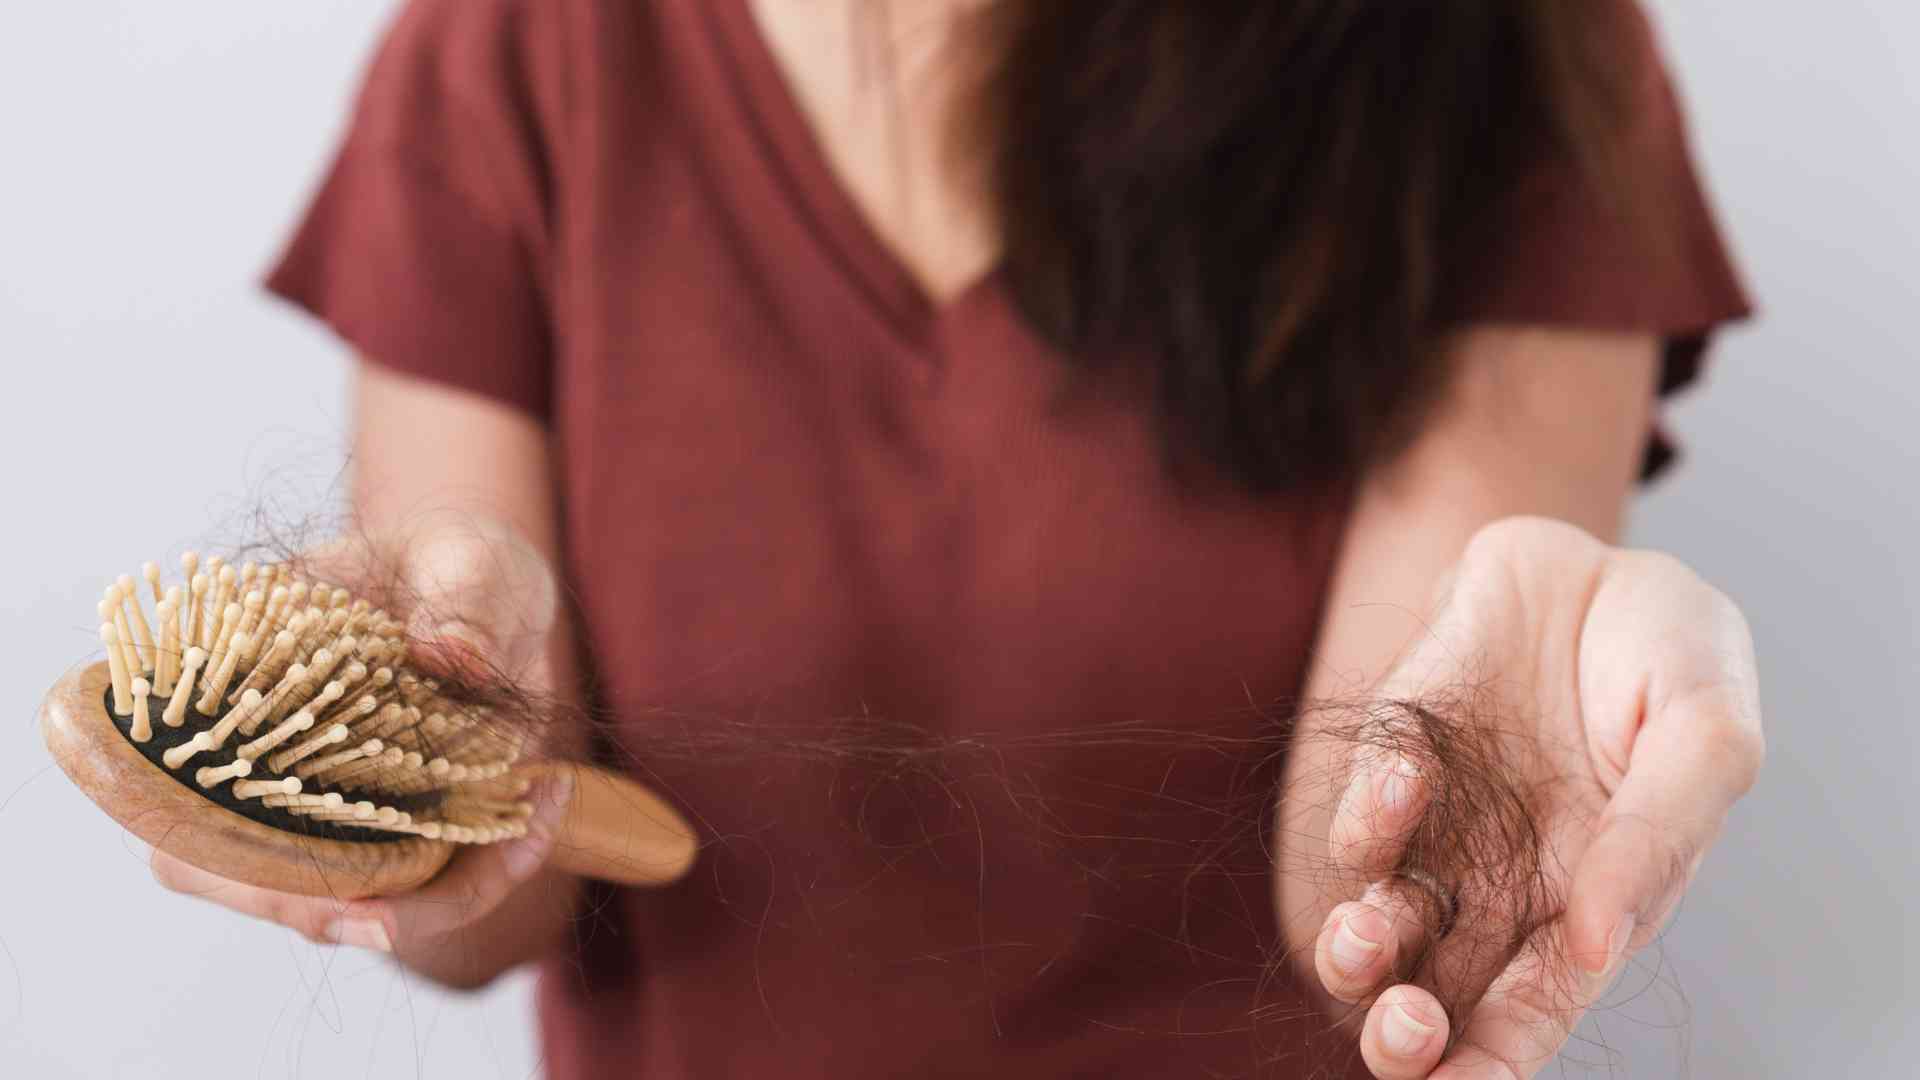 Can you explain the connection between hair loss and autoimmune disorders